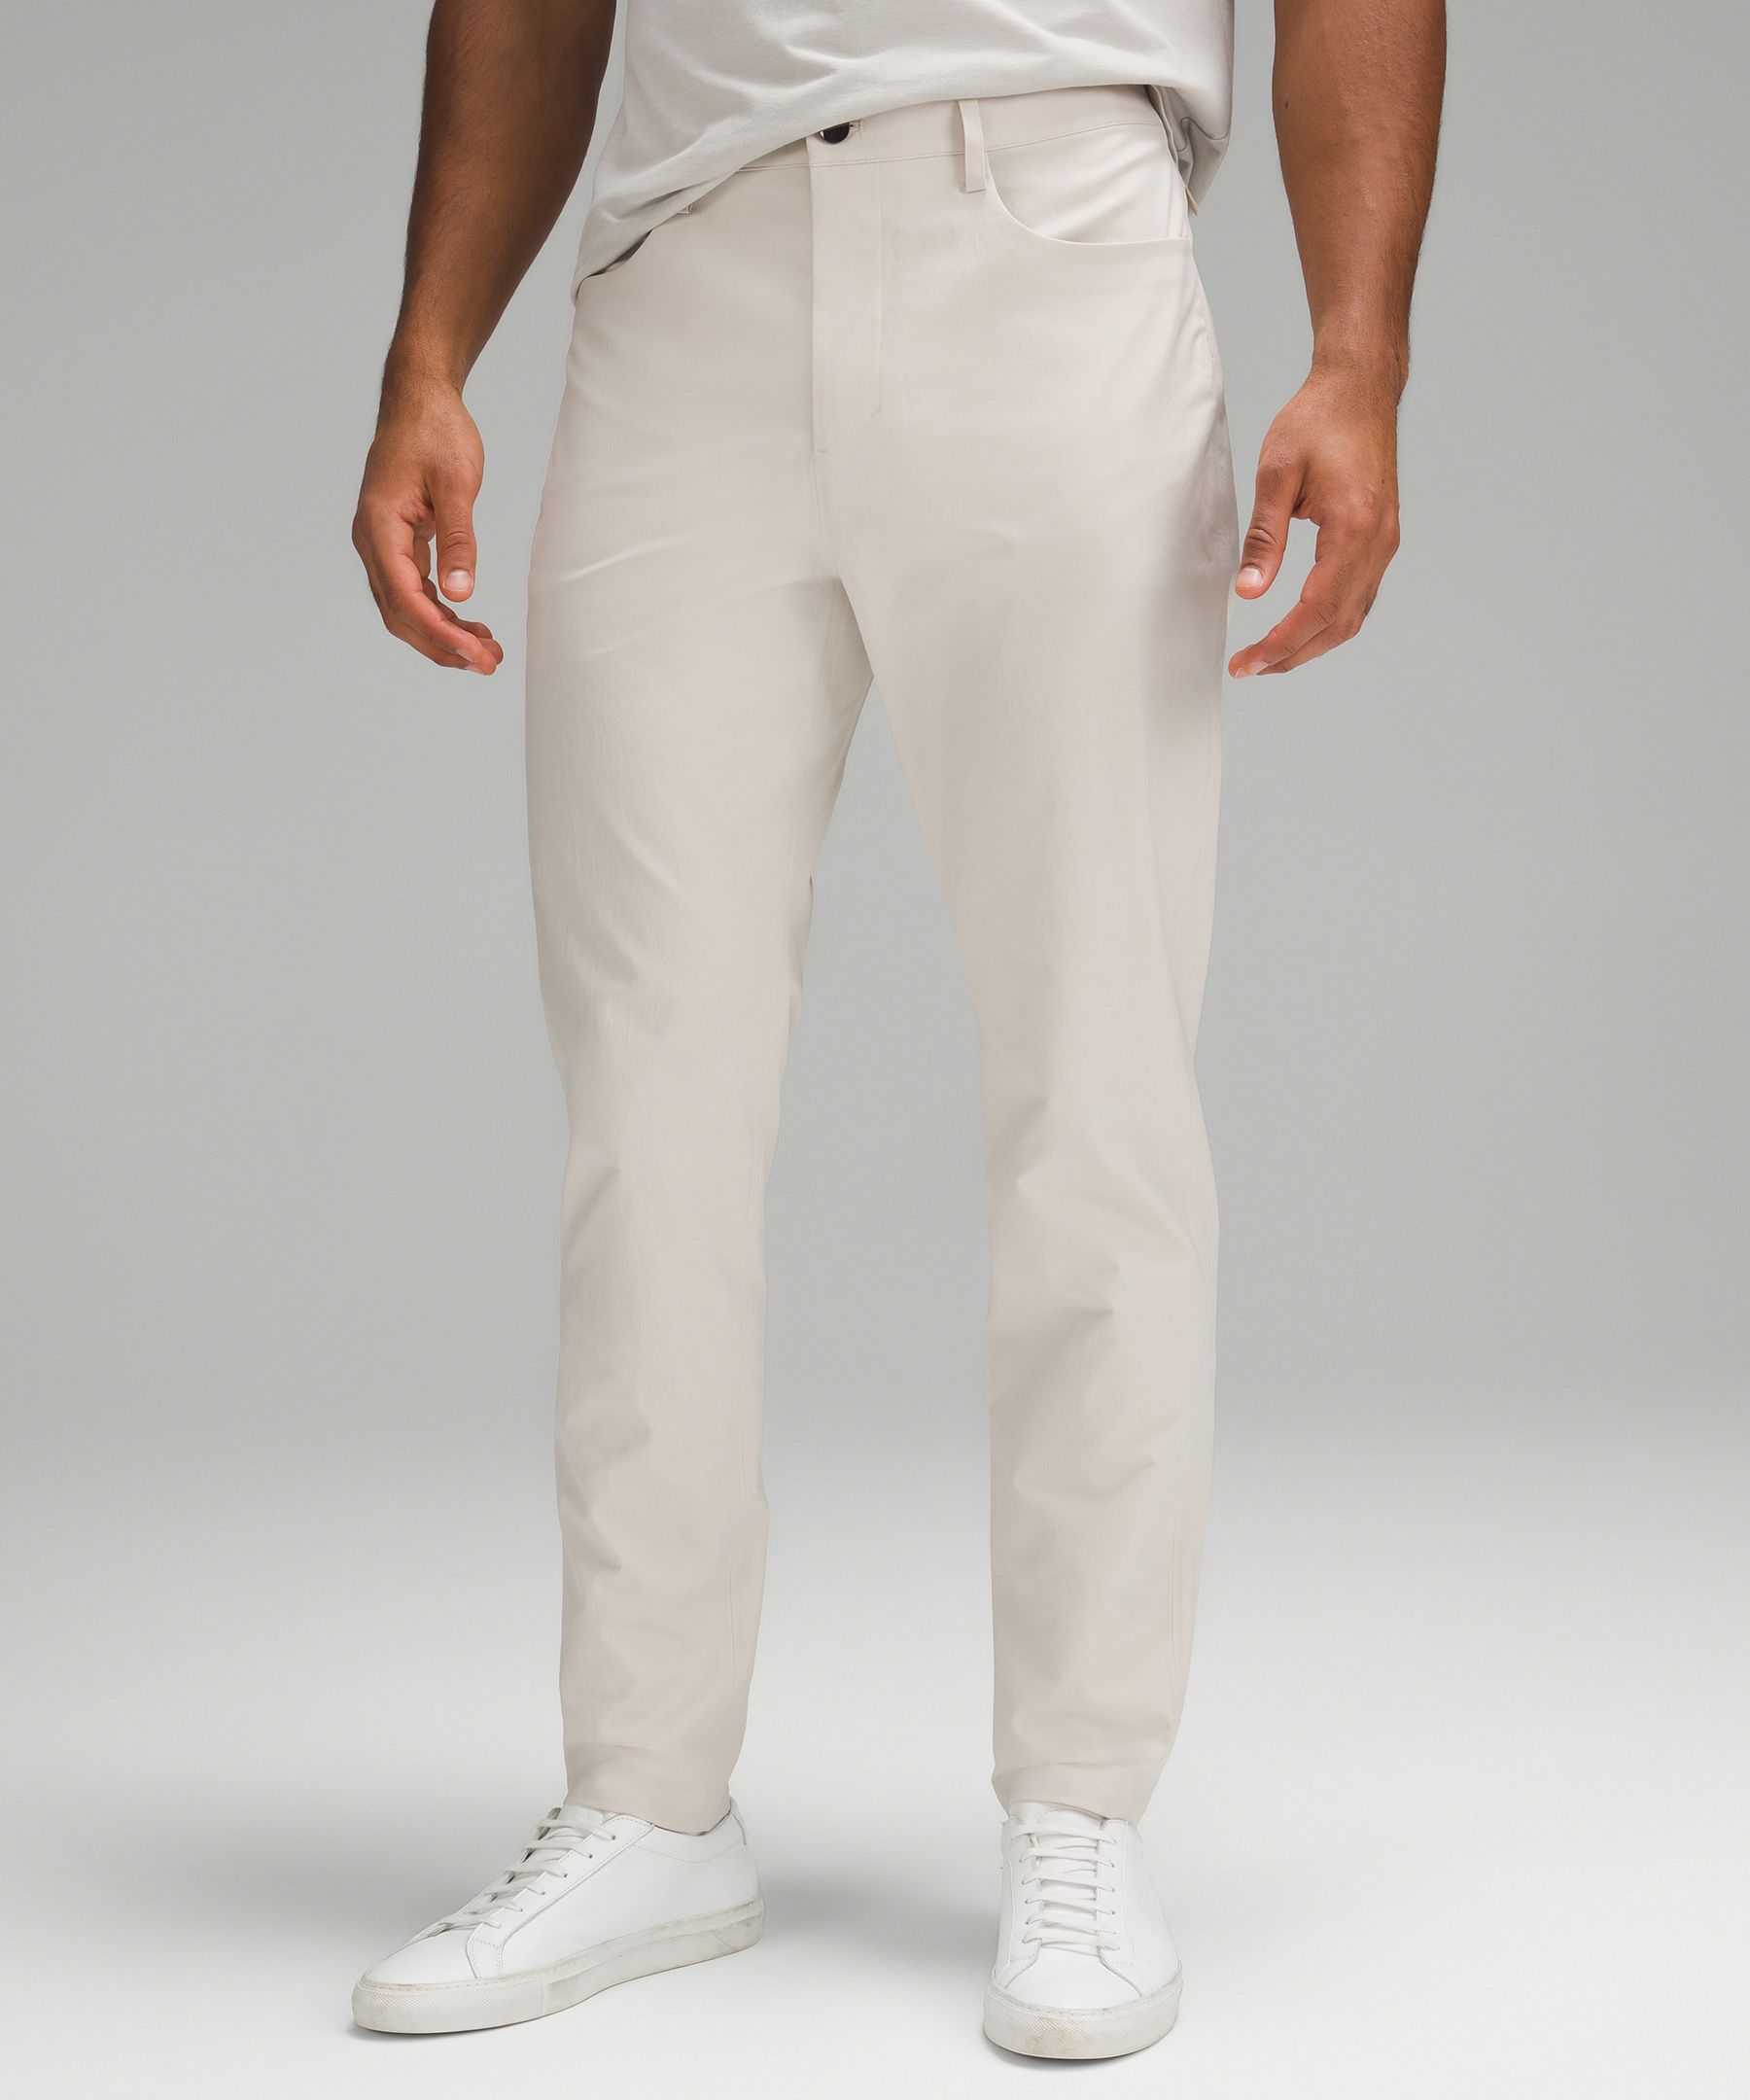 5 Pocket Pull On Ankle Twill Pant from Multiples - 193243943927